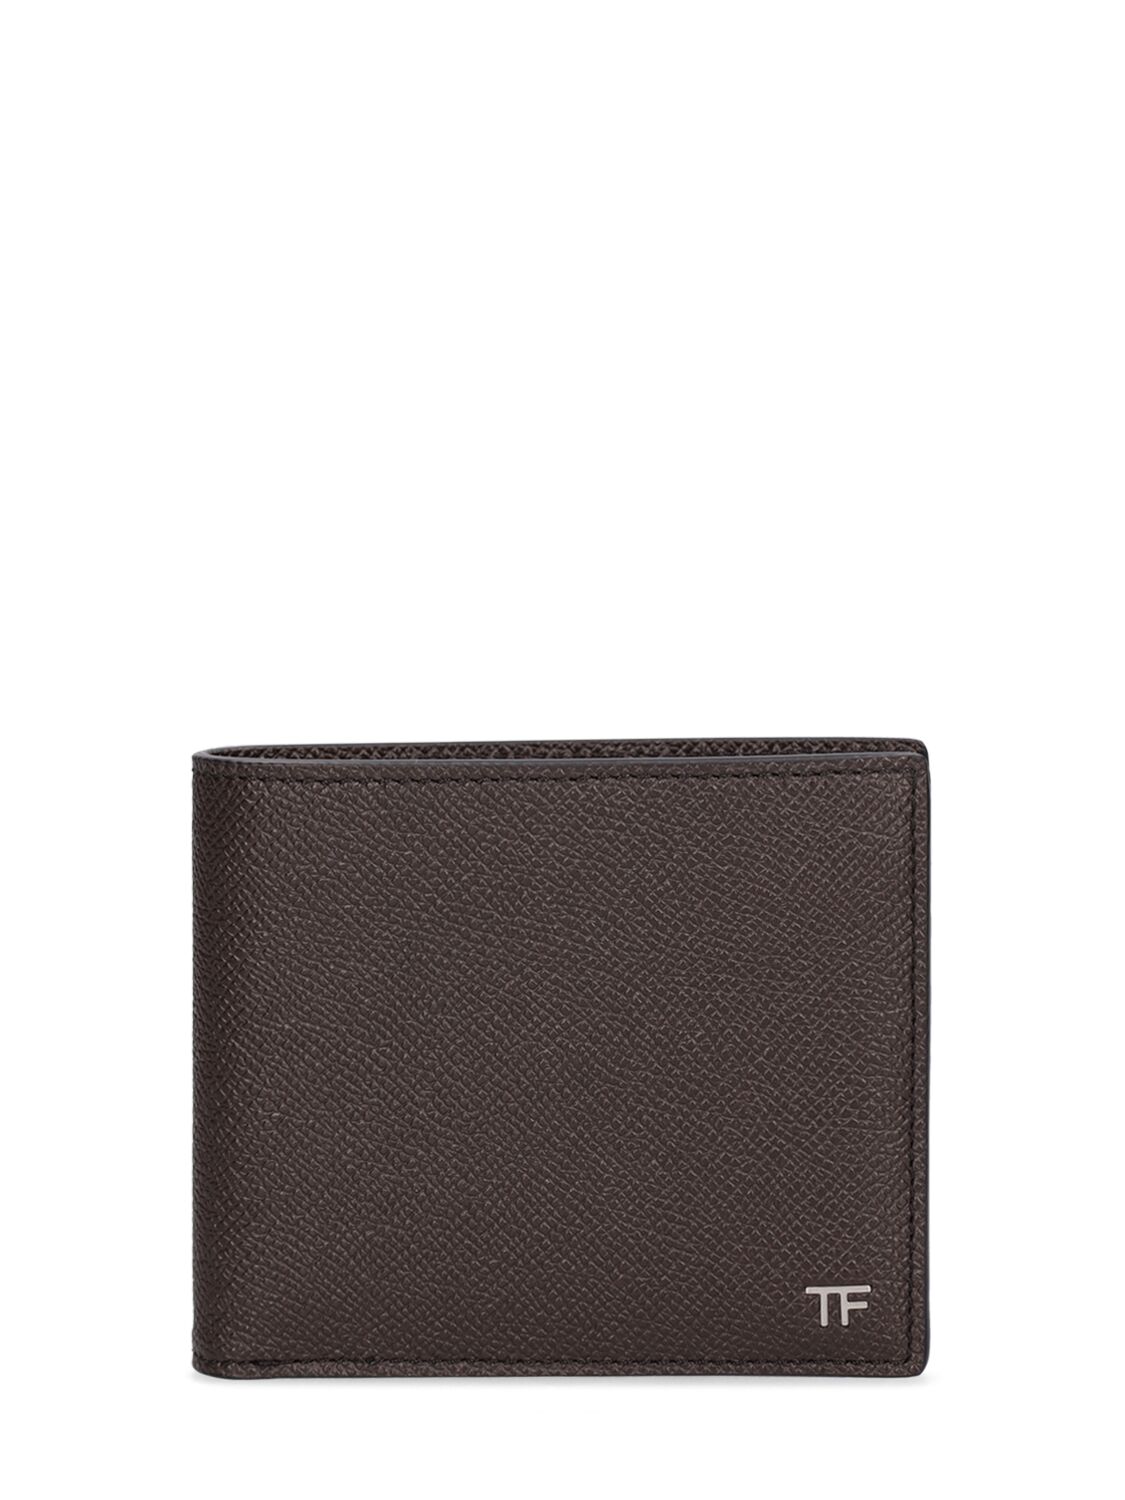 Tom Ford Saffiano Leather Bifold Wallet In Chocolate